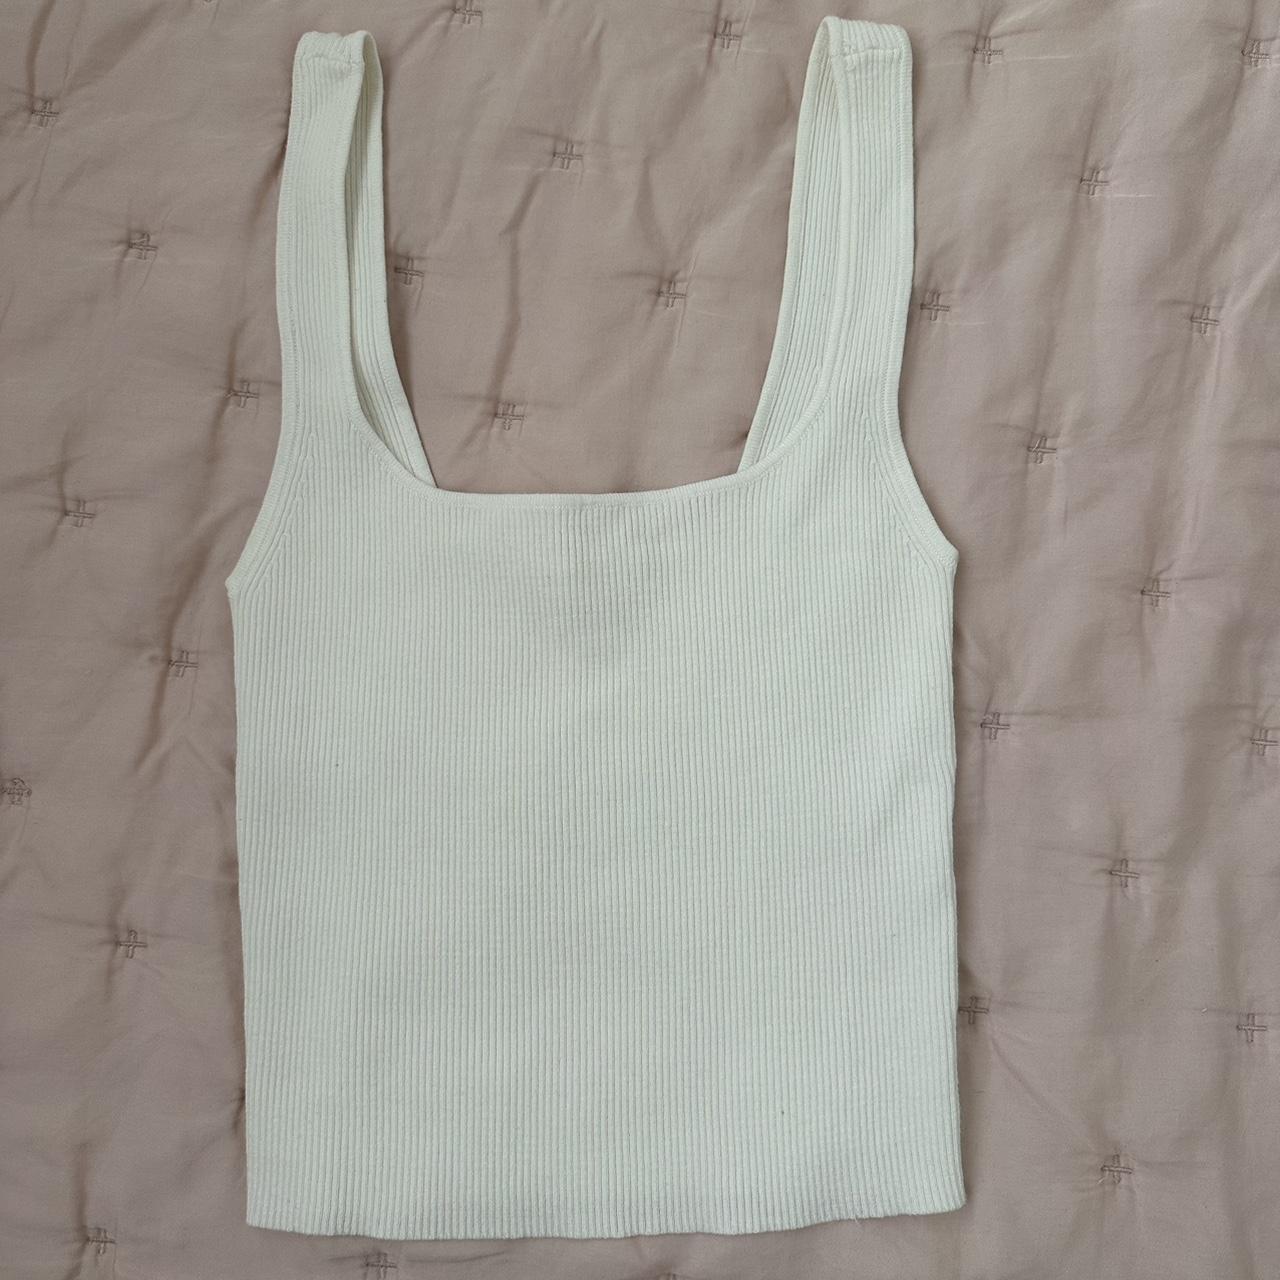 Kookai tank I’m pretty sure this is called the... - Depop